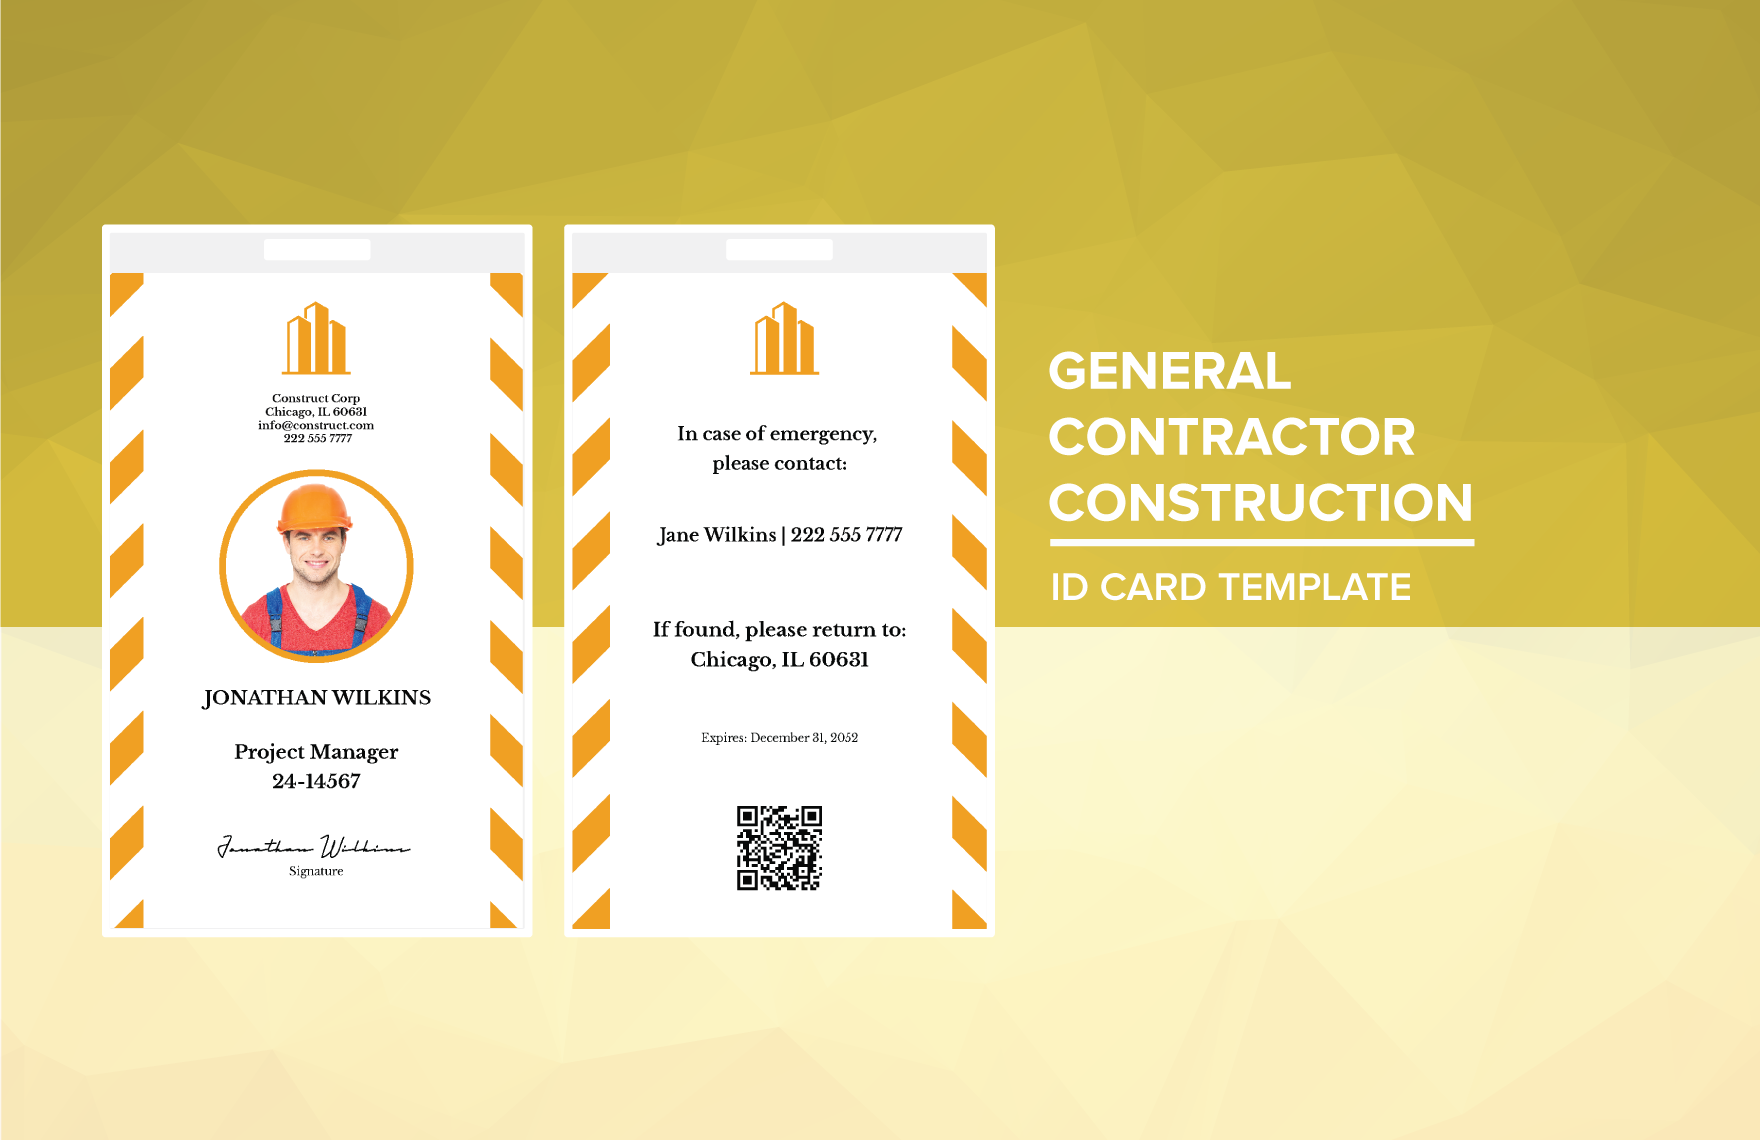 General Contractor Construction ID Card